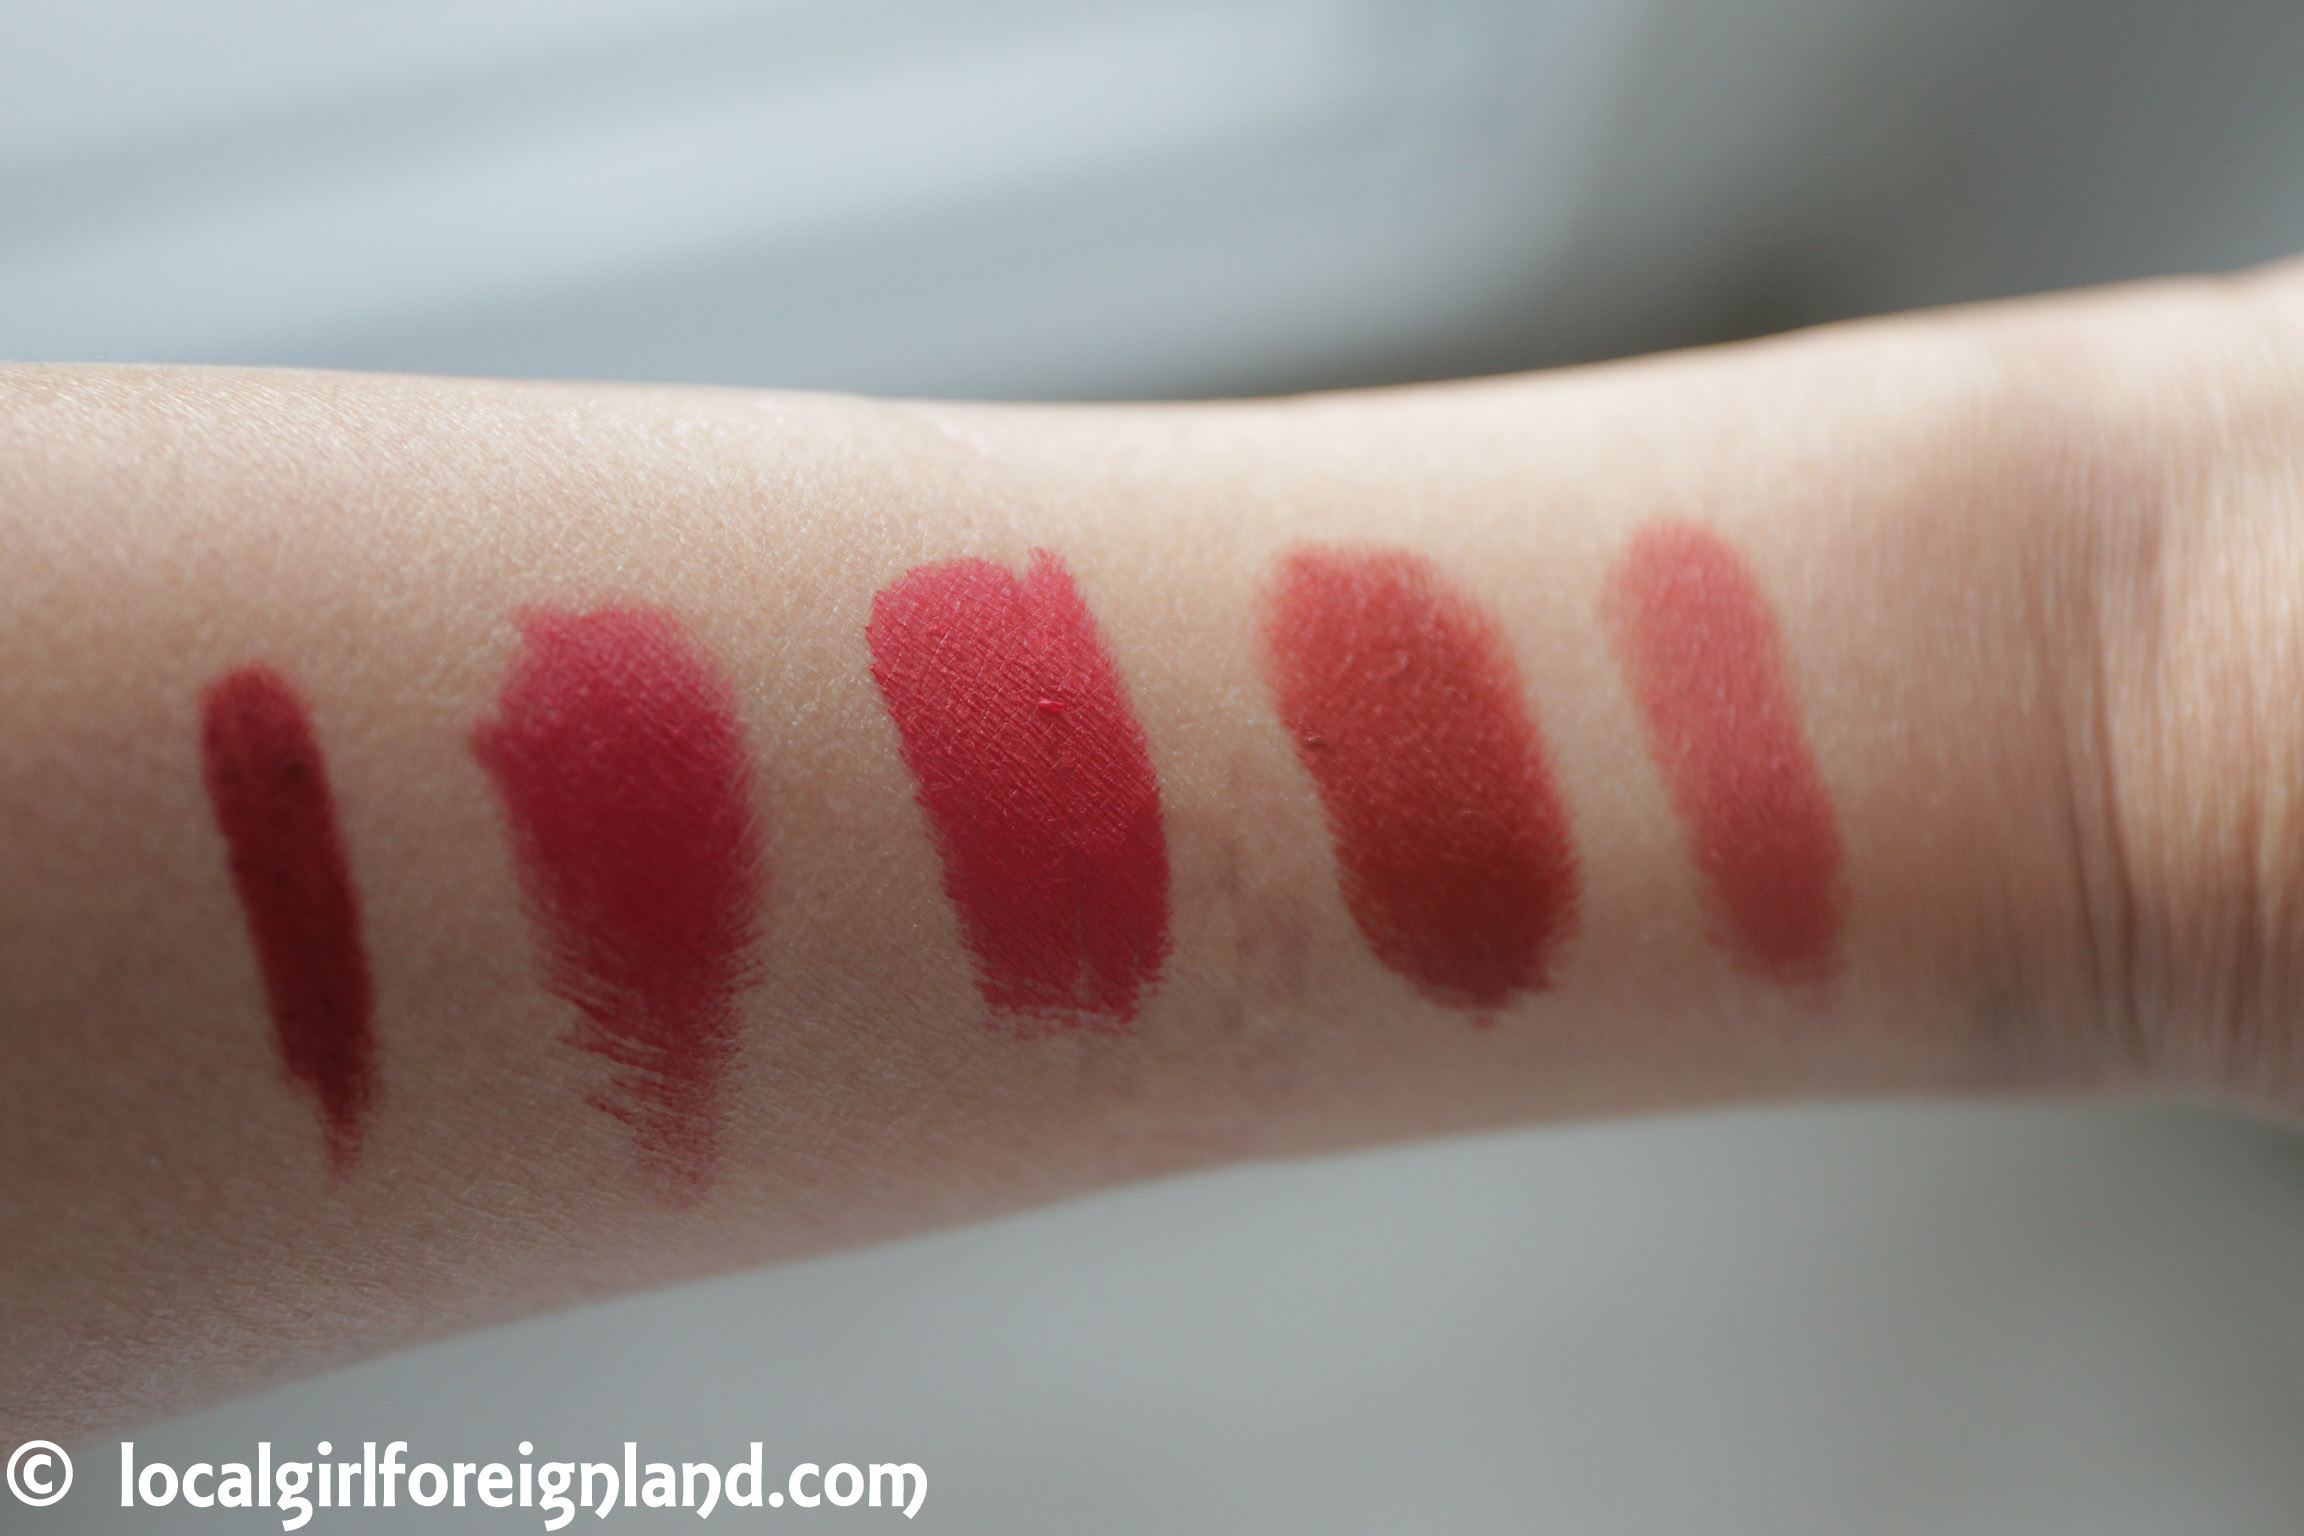 Ruby Woo dupe